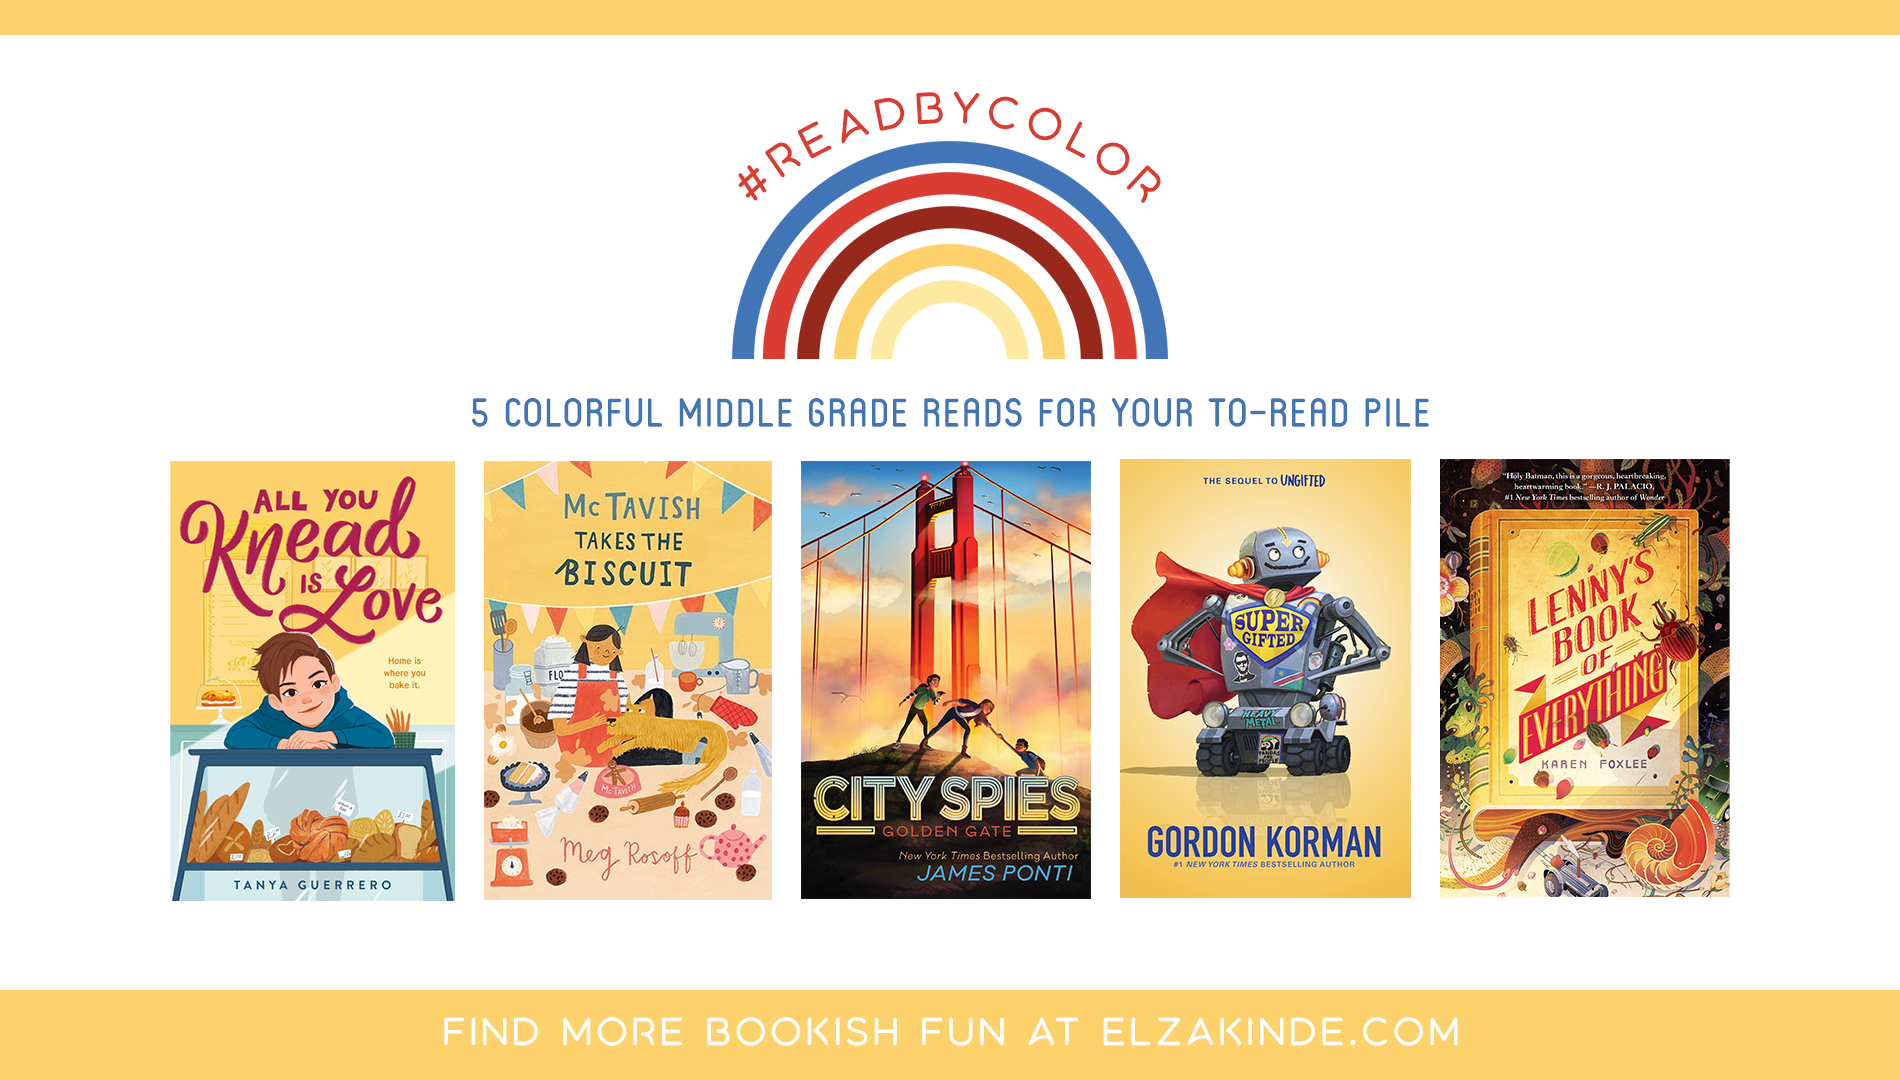 #ReadByColor: 5 Colorful Middle Grade Reads for Your To-Read Pile | features the book covers of ALL YOU KNEAD IS LOVE by Tanya Guerrero; MCTAVISH TAKES THE BISCUIT by Meg Risoff; CITY SPIES: GOLDEN GATE by James Ponti; SUPERGIFTED by Gordon Korman; and LENNY'S BOOK OF EVERYTHING by Karen Foxlee.